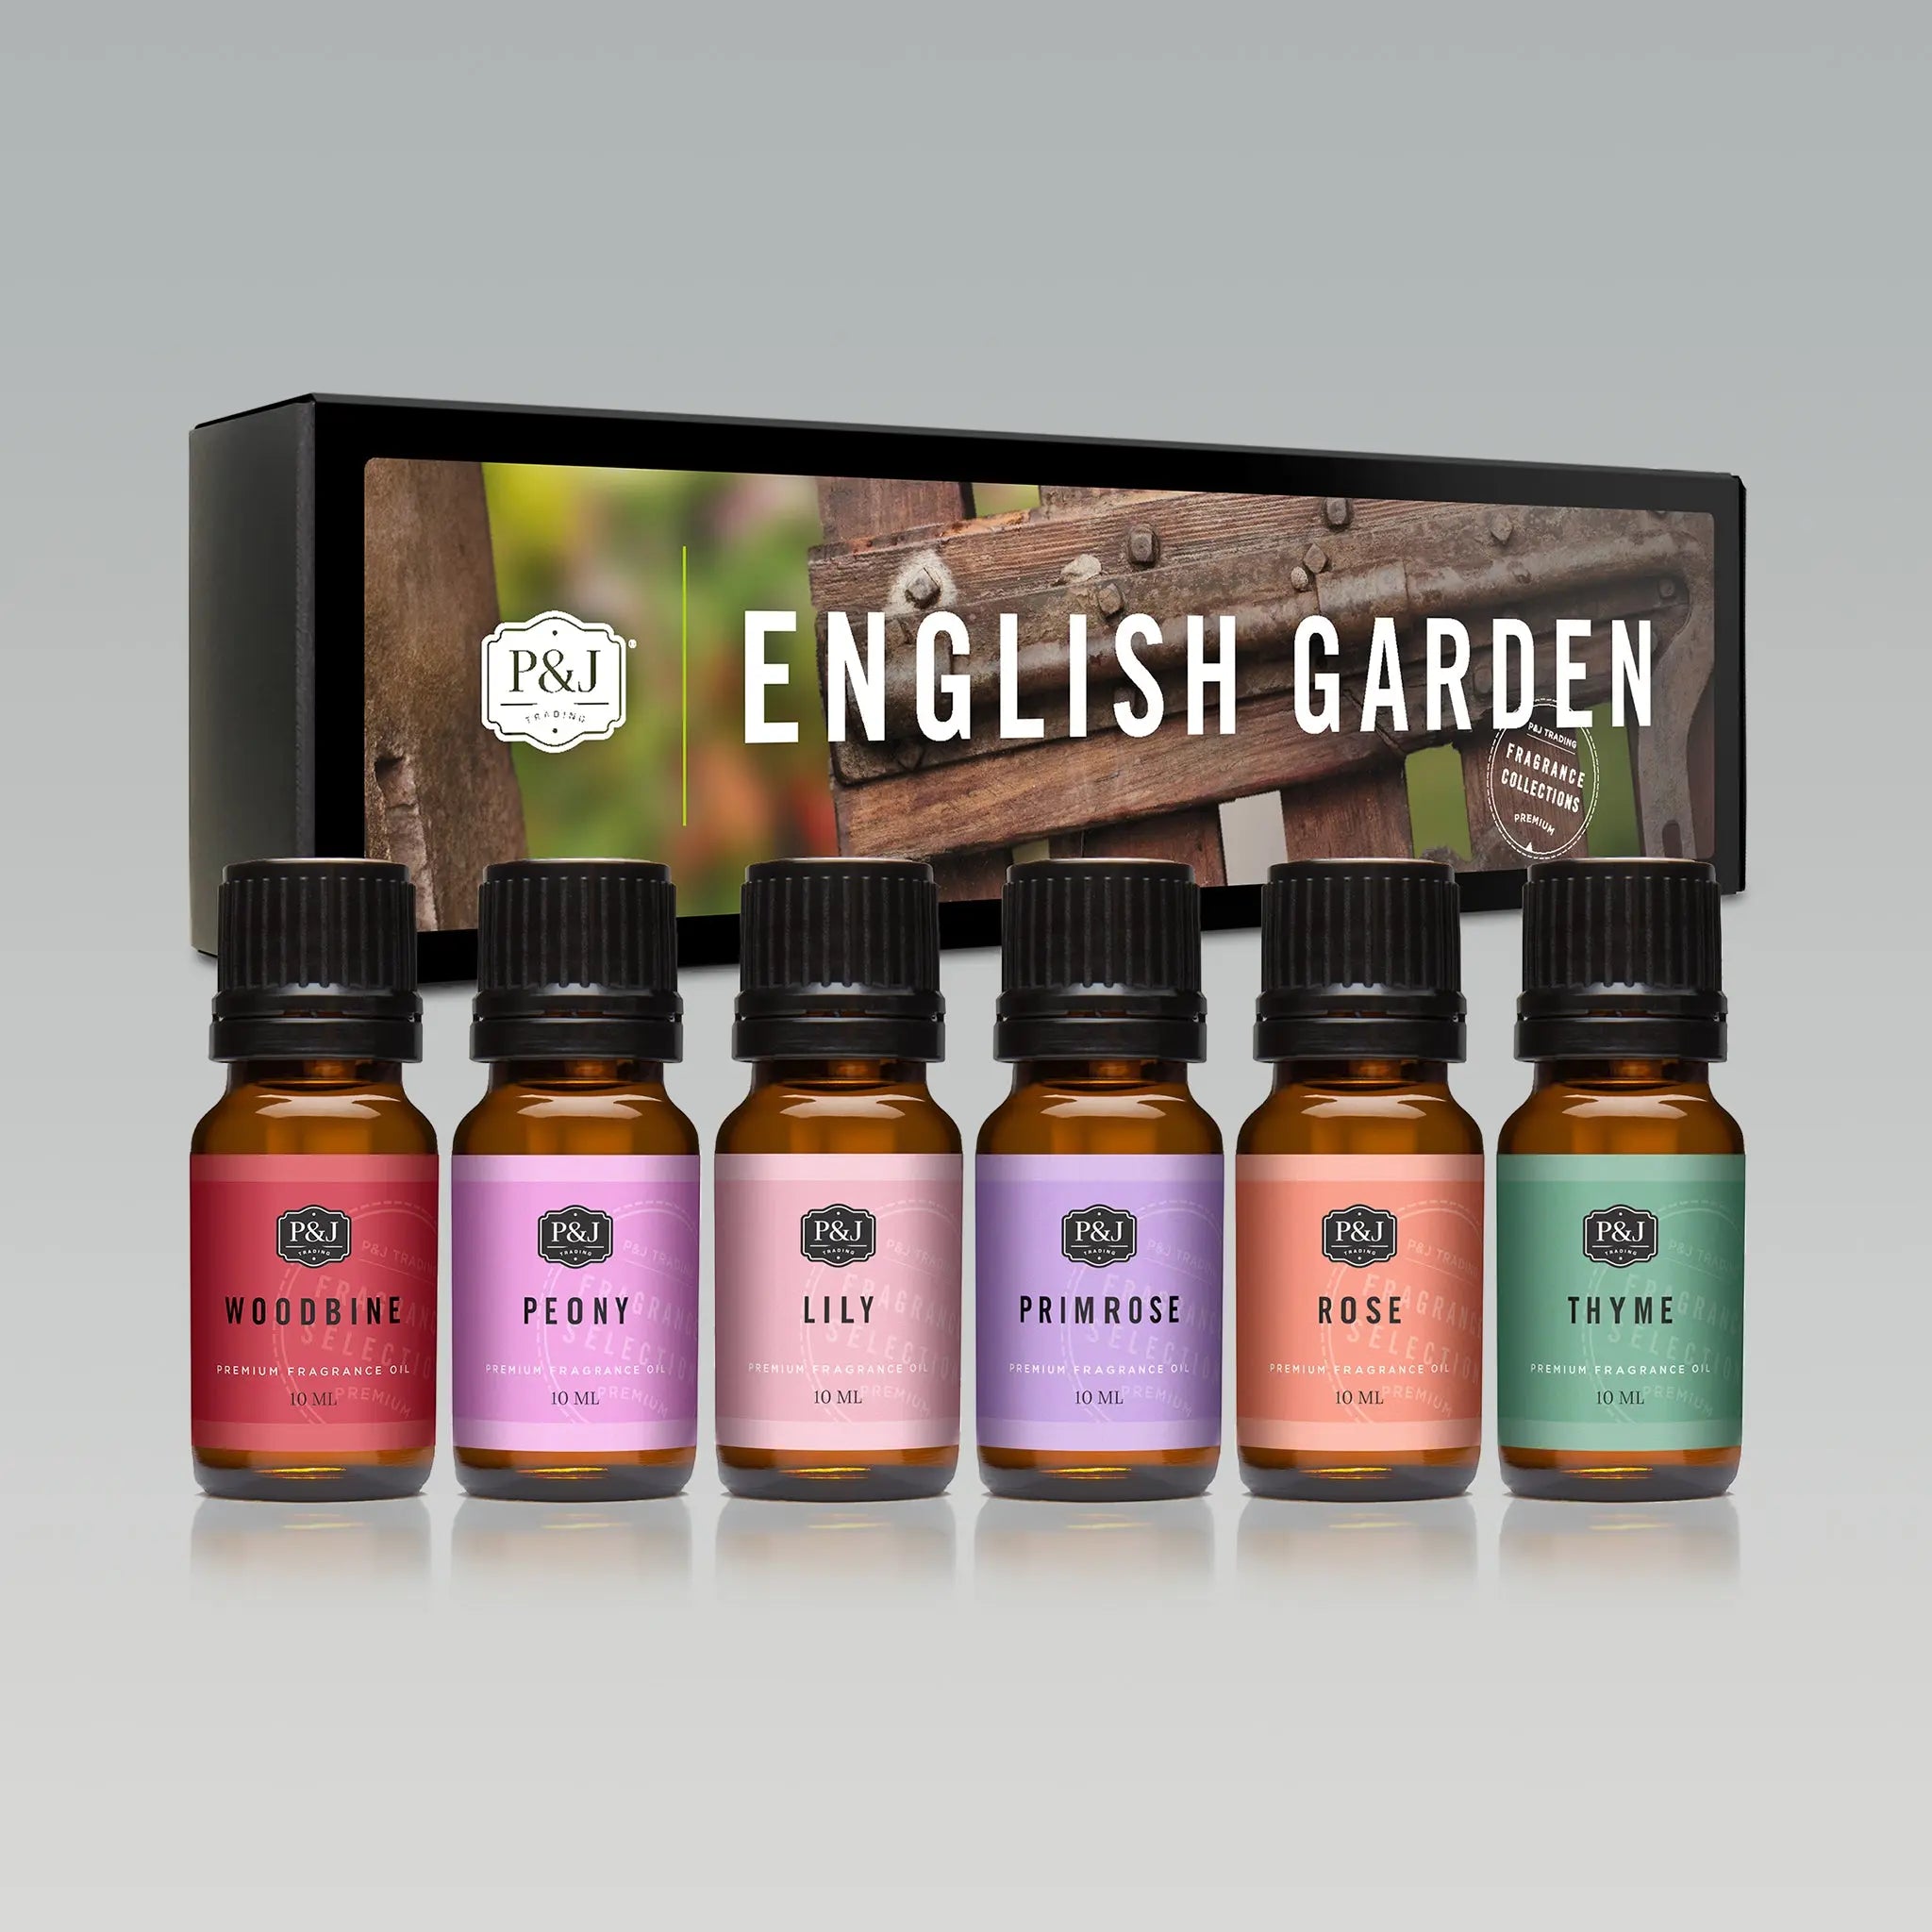 P&j Fragrance Oil English Garden Set | Rose, Woodbine, Thyme, Primrose, Lily, Peonies Candle Scents for Candle Making, Freshie Scents, Soap Making